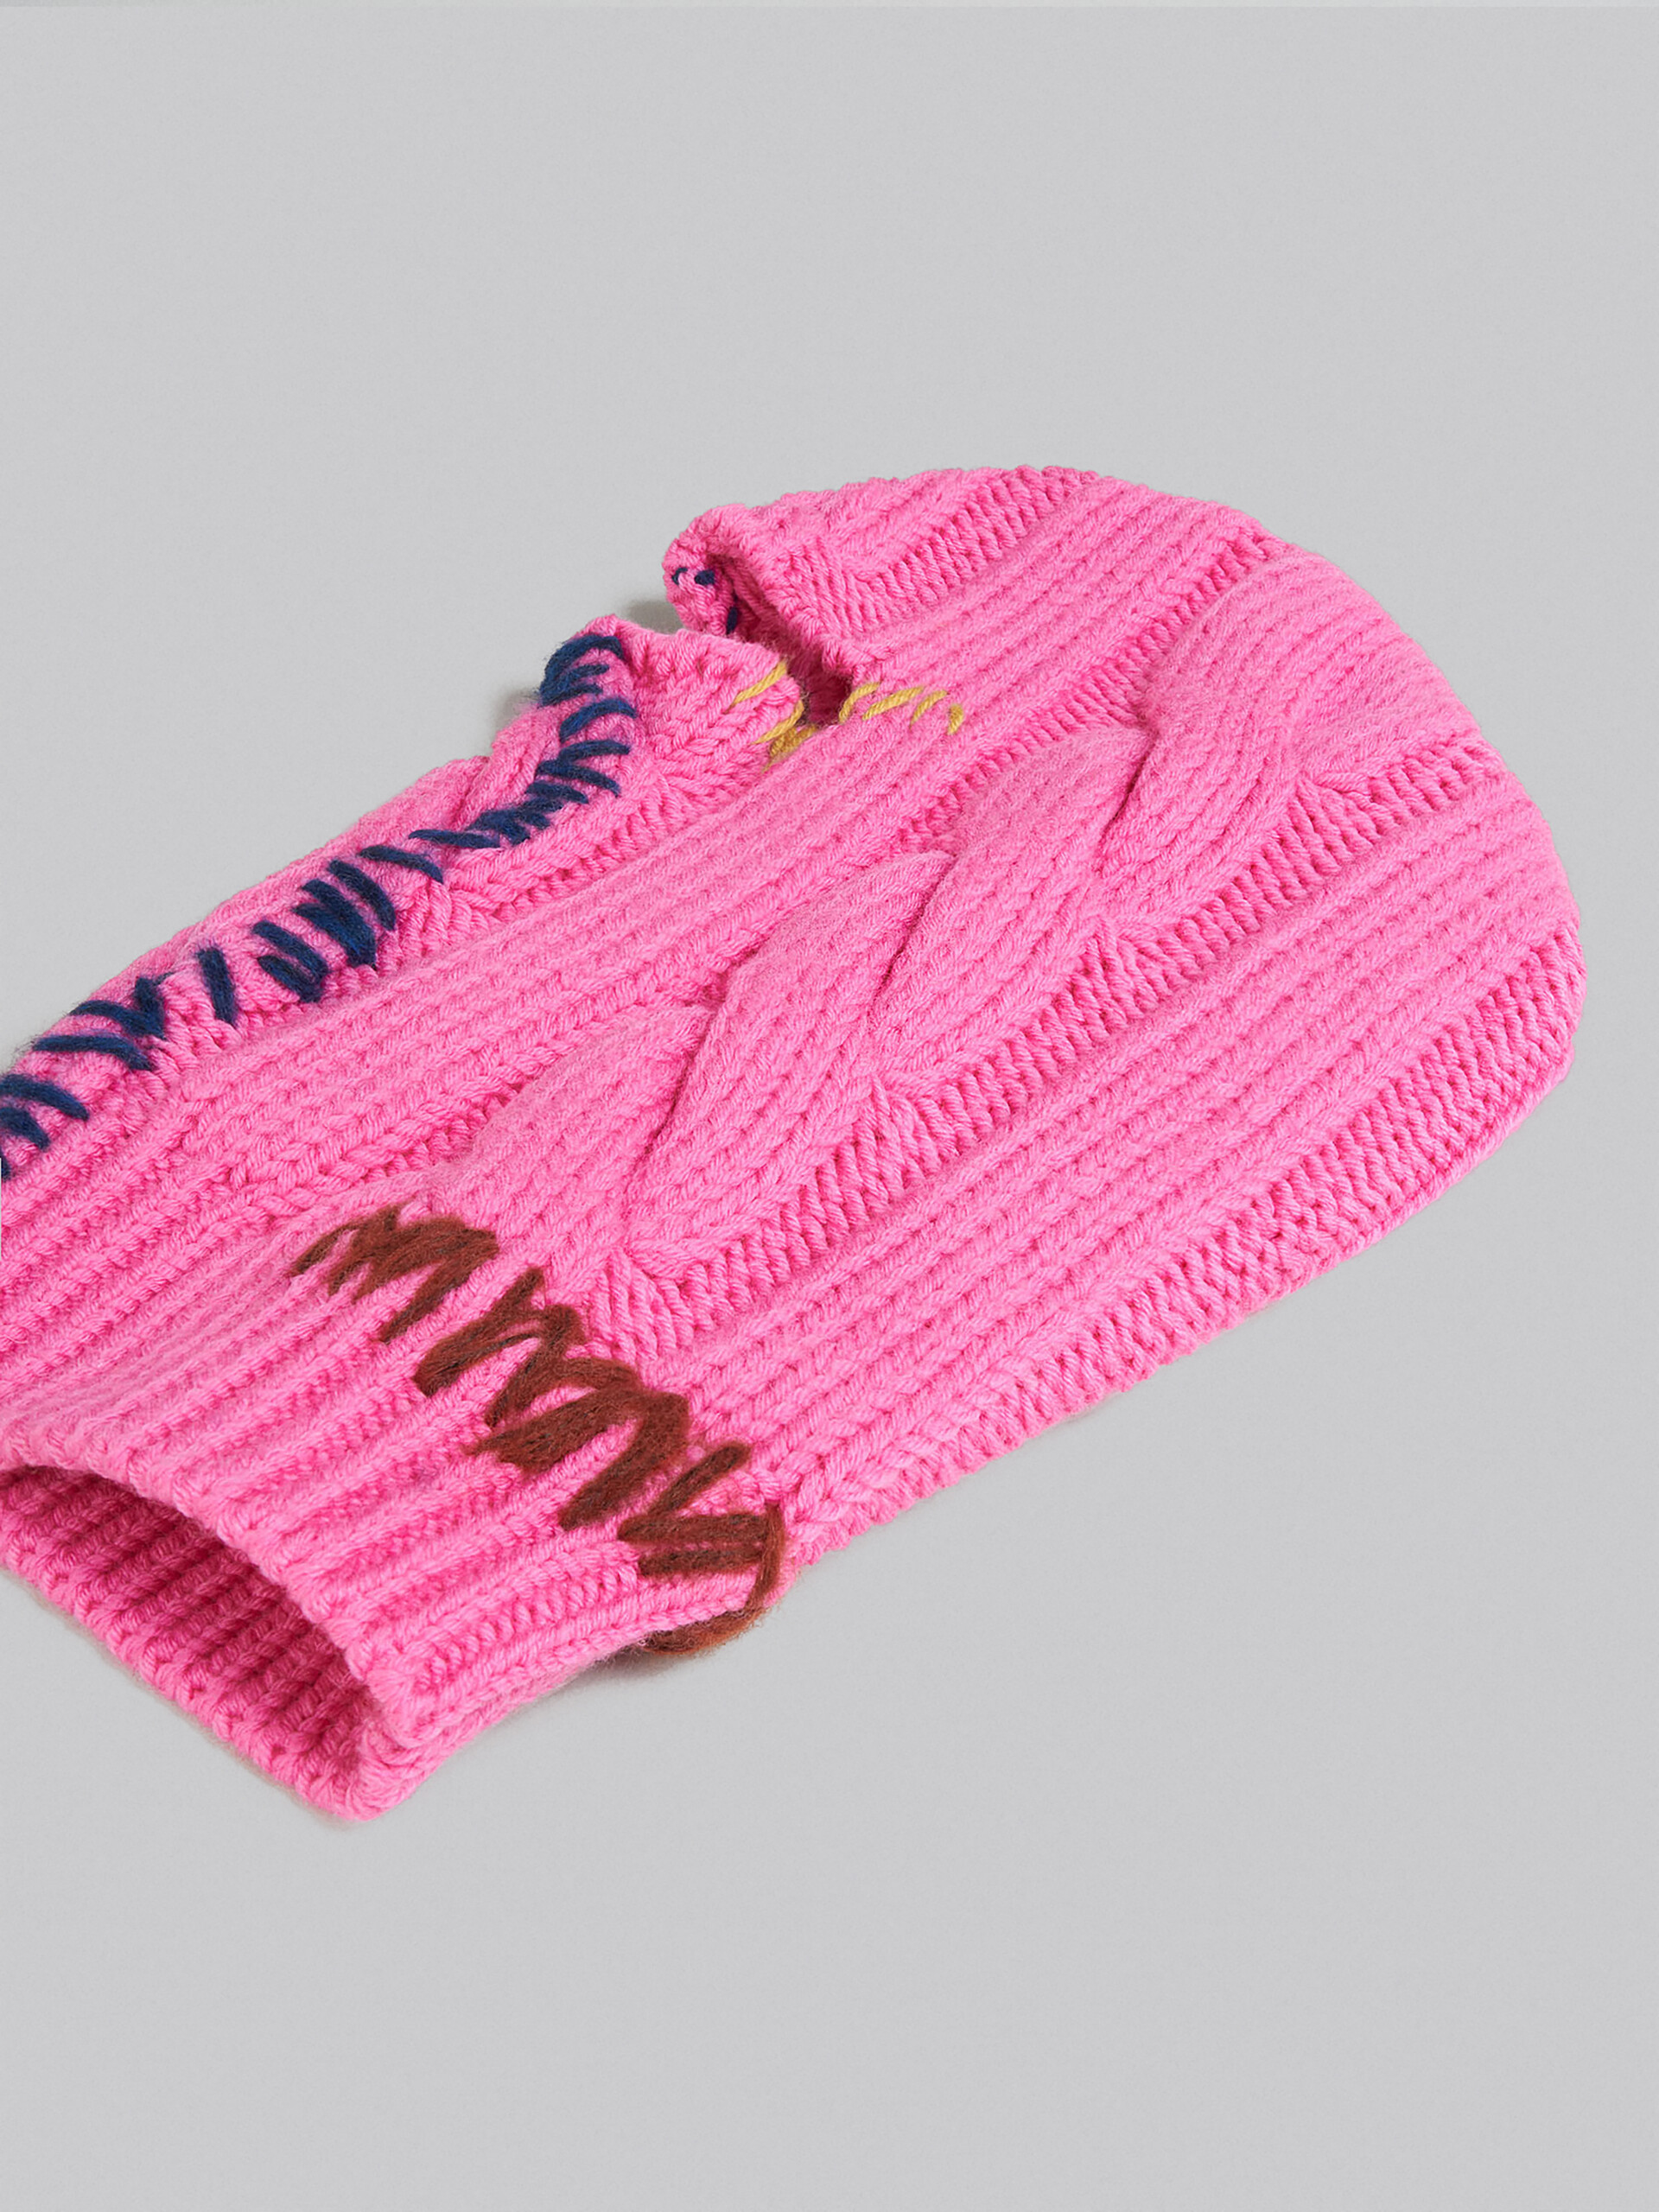 Fuchsia wool balaclava with contrasting mending - Other accessories - Image 3